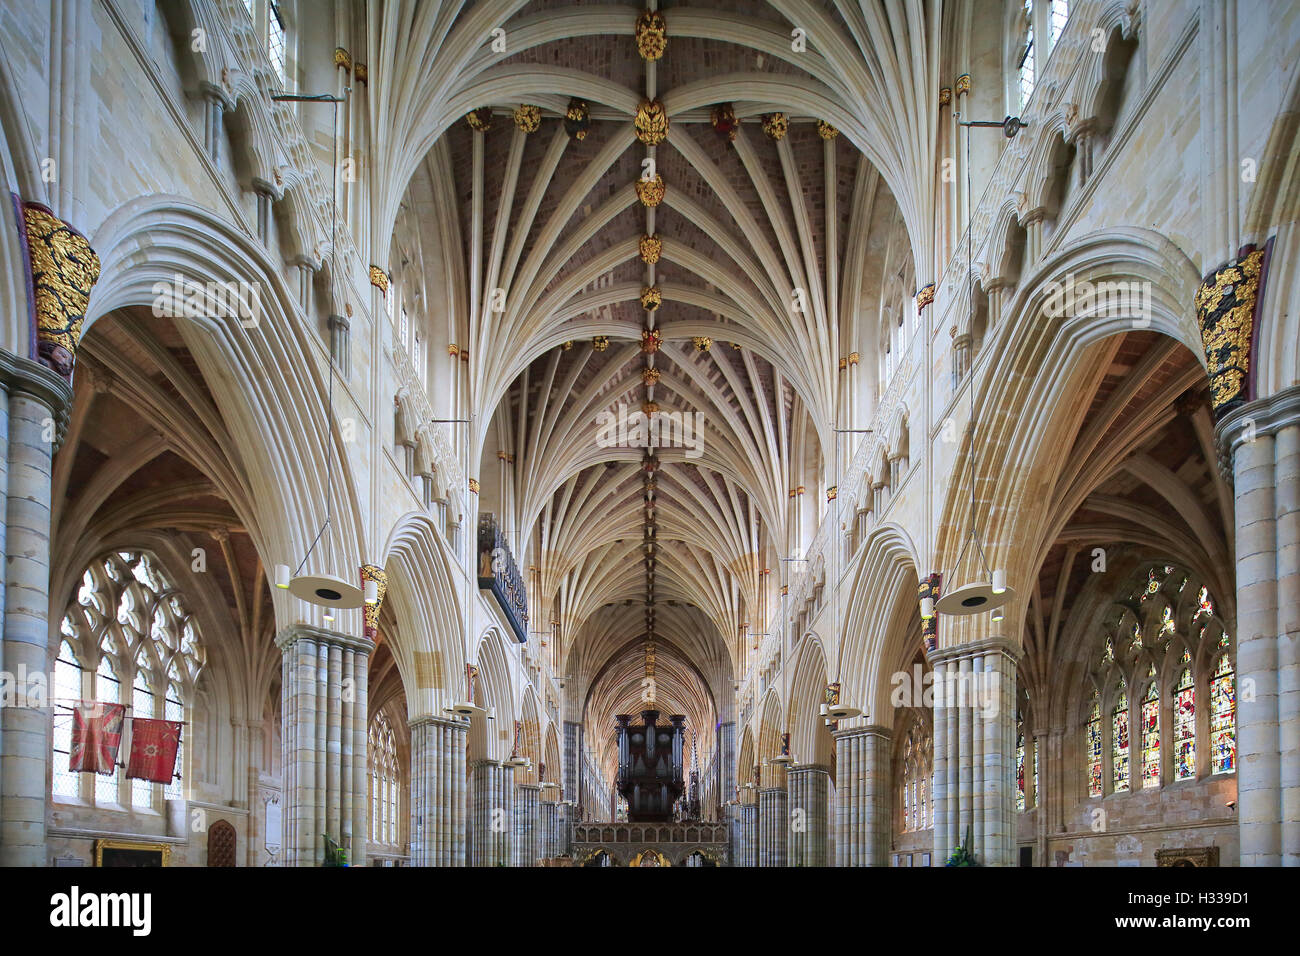 Fan vaulting, nave, The Cathedral Church of St Peter, Exeter, Devon, England, United Kingdom Stock Photo